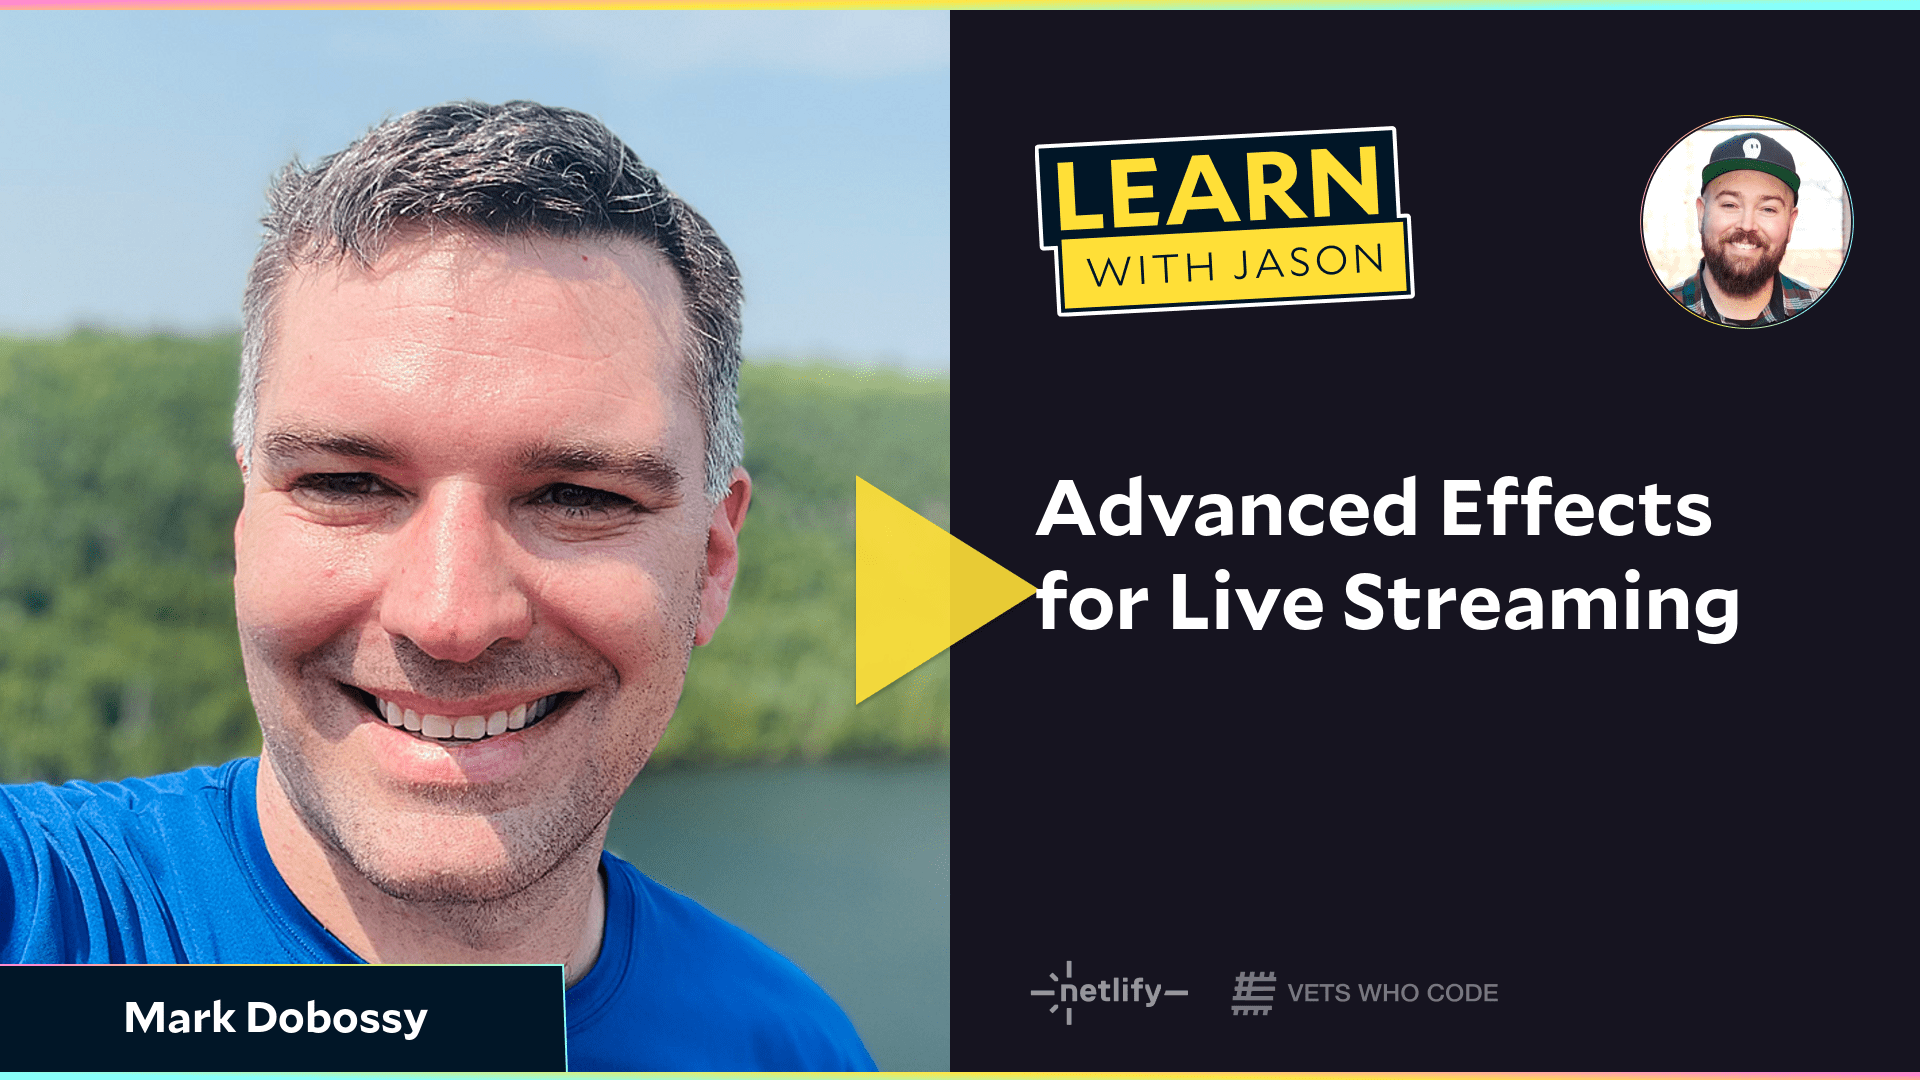 Advanced Effects for Live Streaming (with Mark Dobossy)